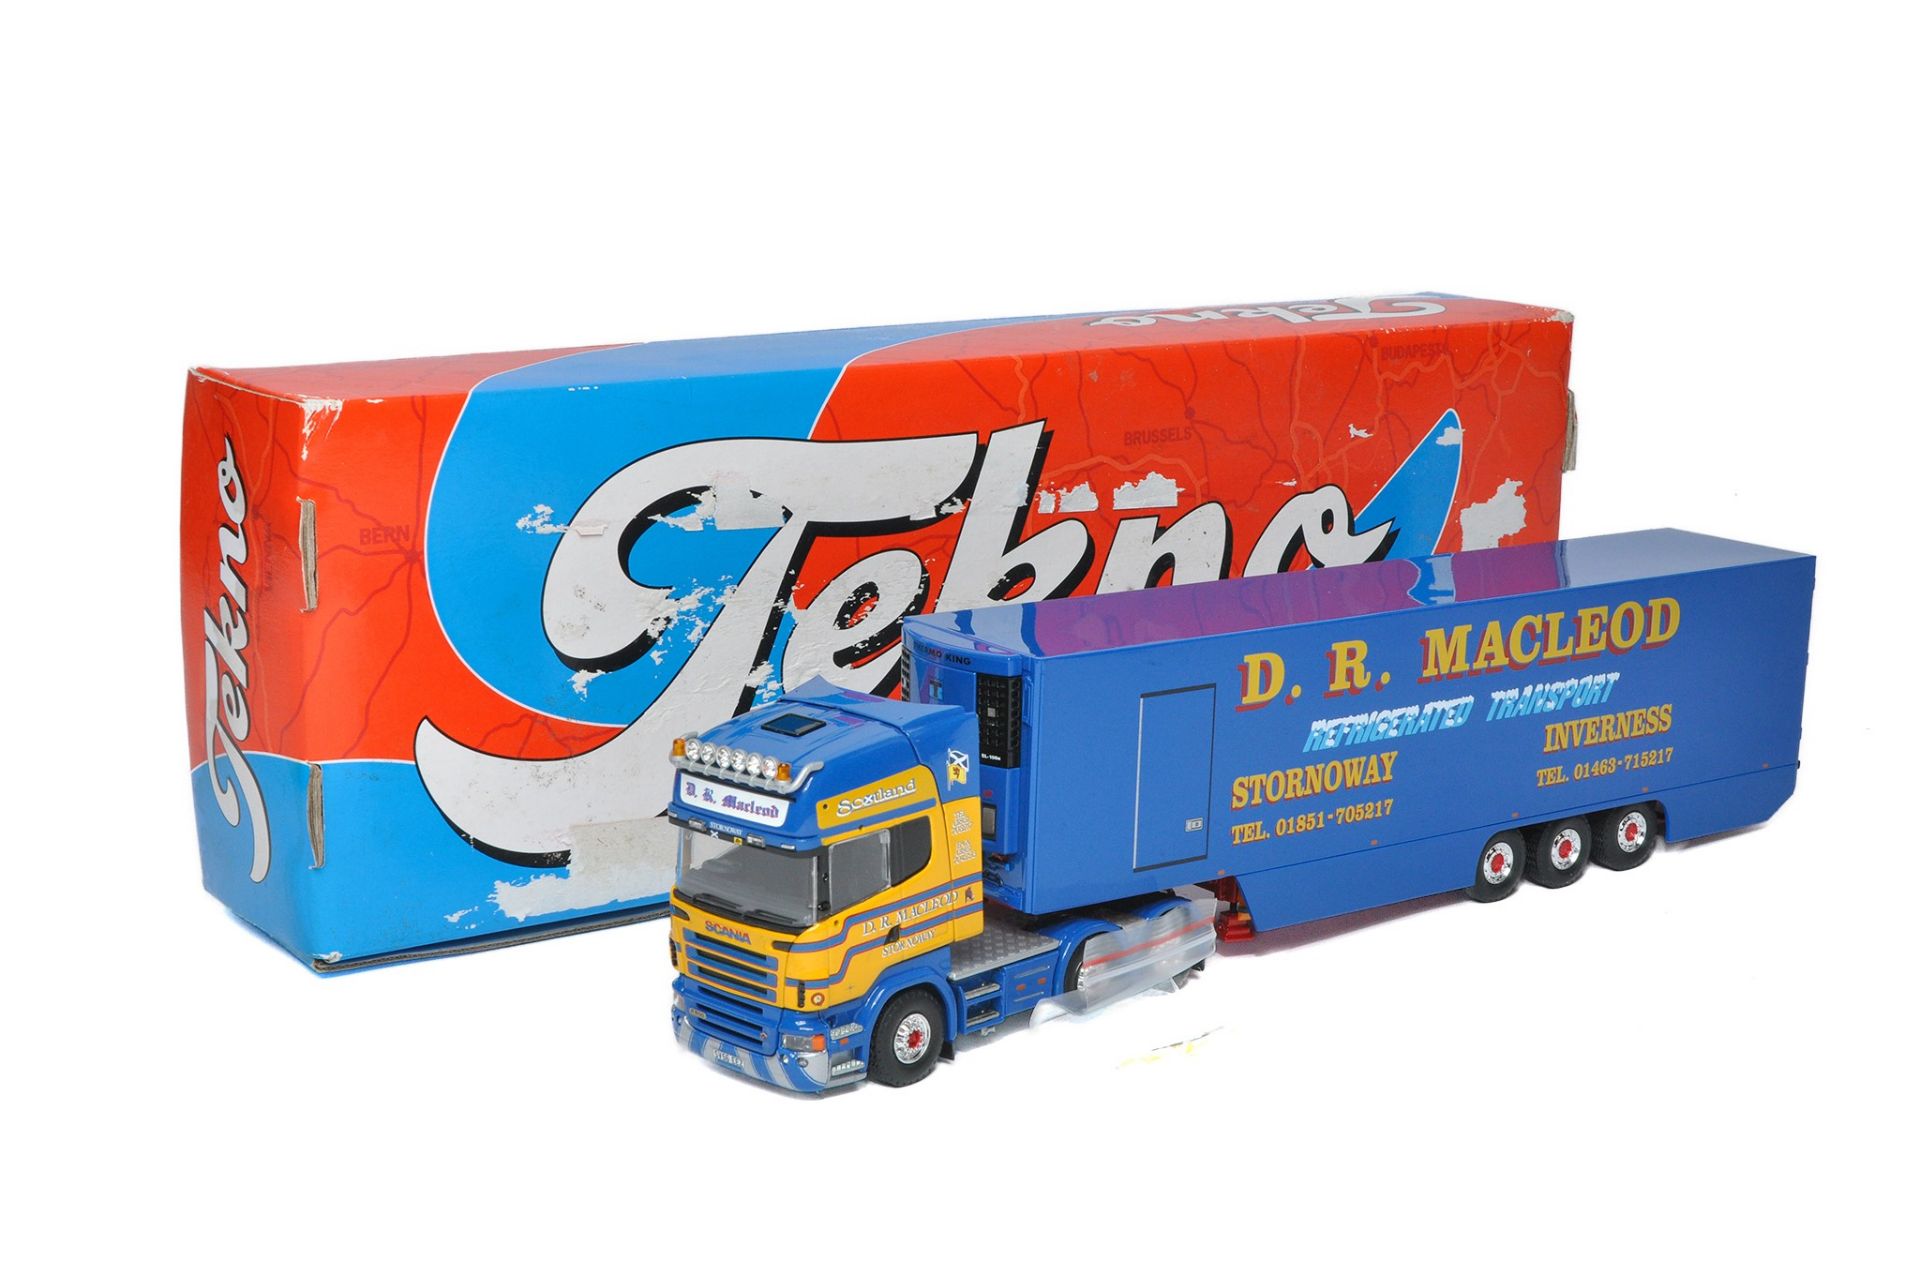 Tekno 1/50 diecast model truck issue comprising Scania Fridge in the livery of D. R. Macleod.